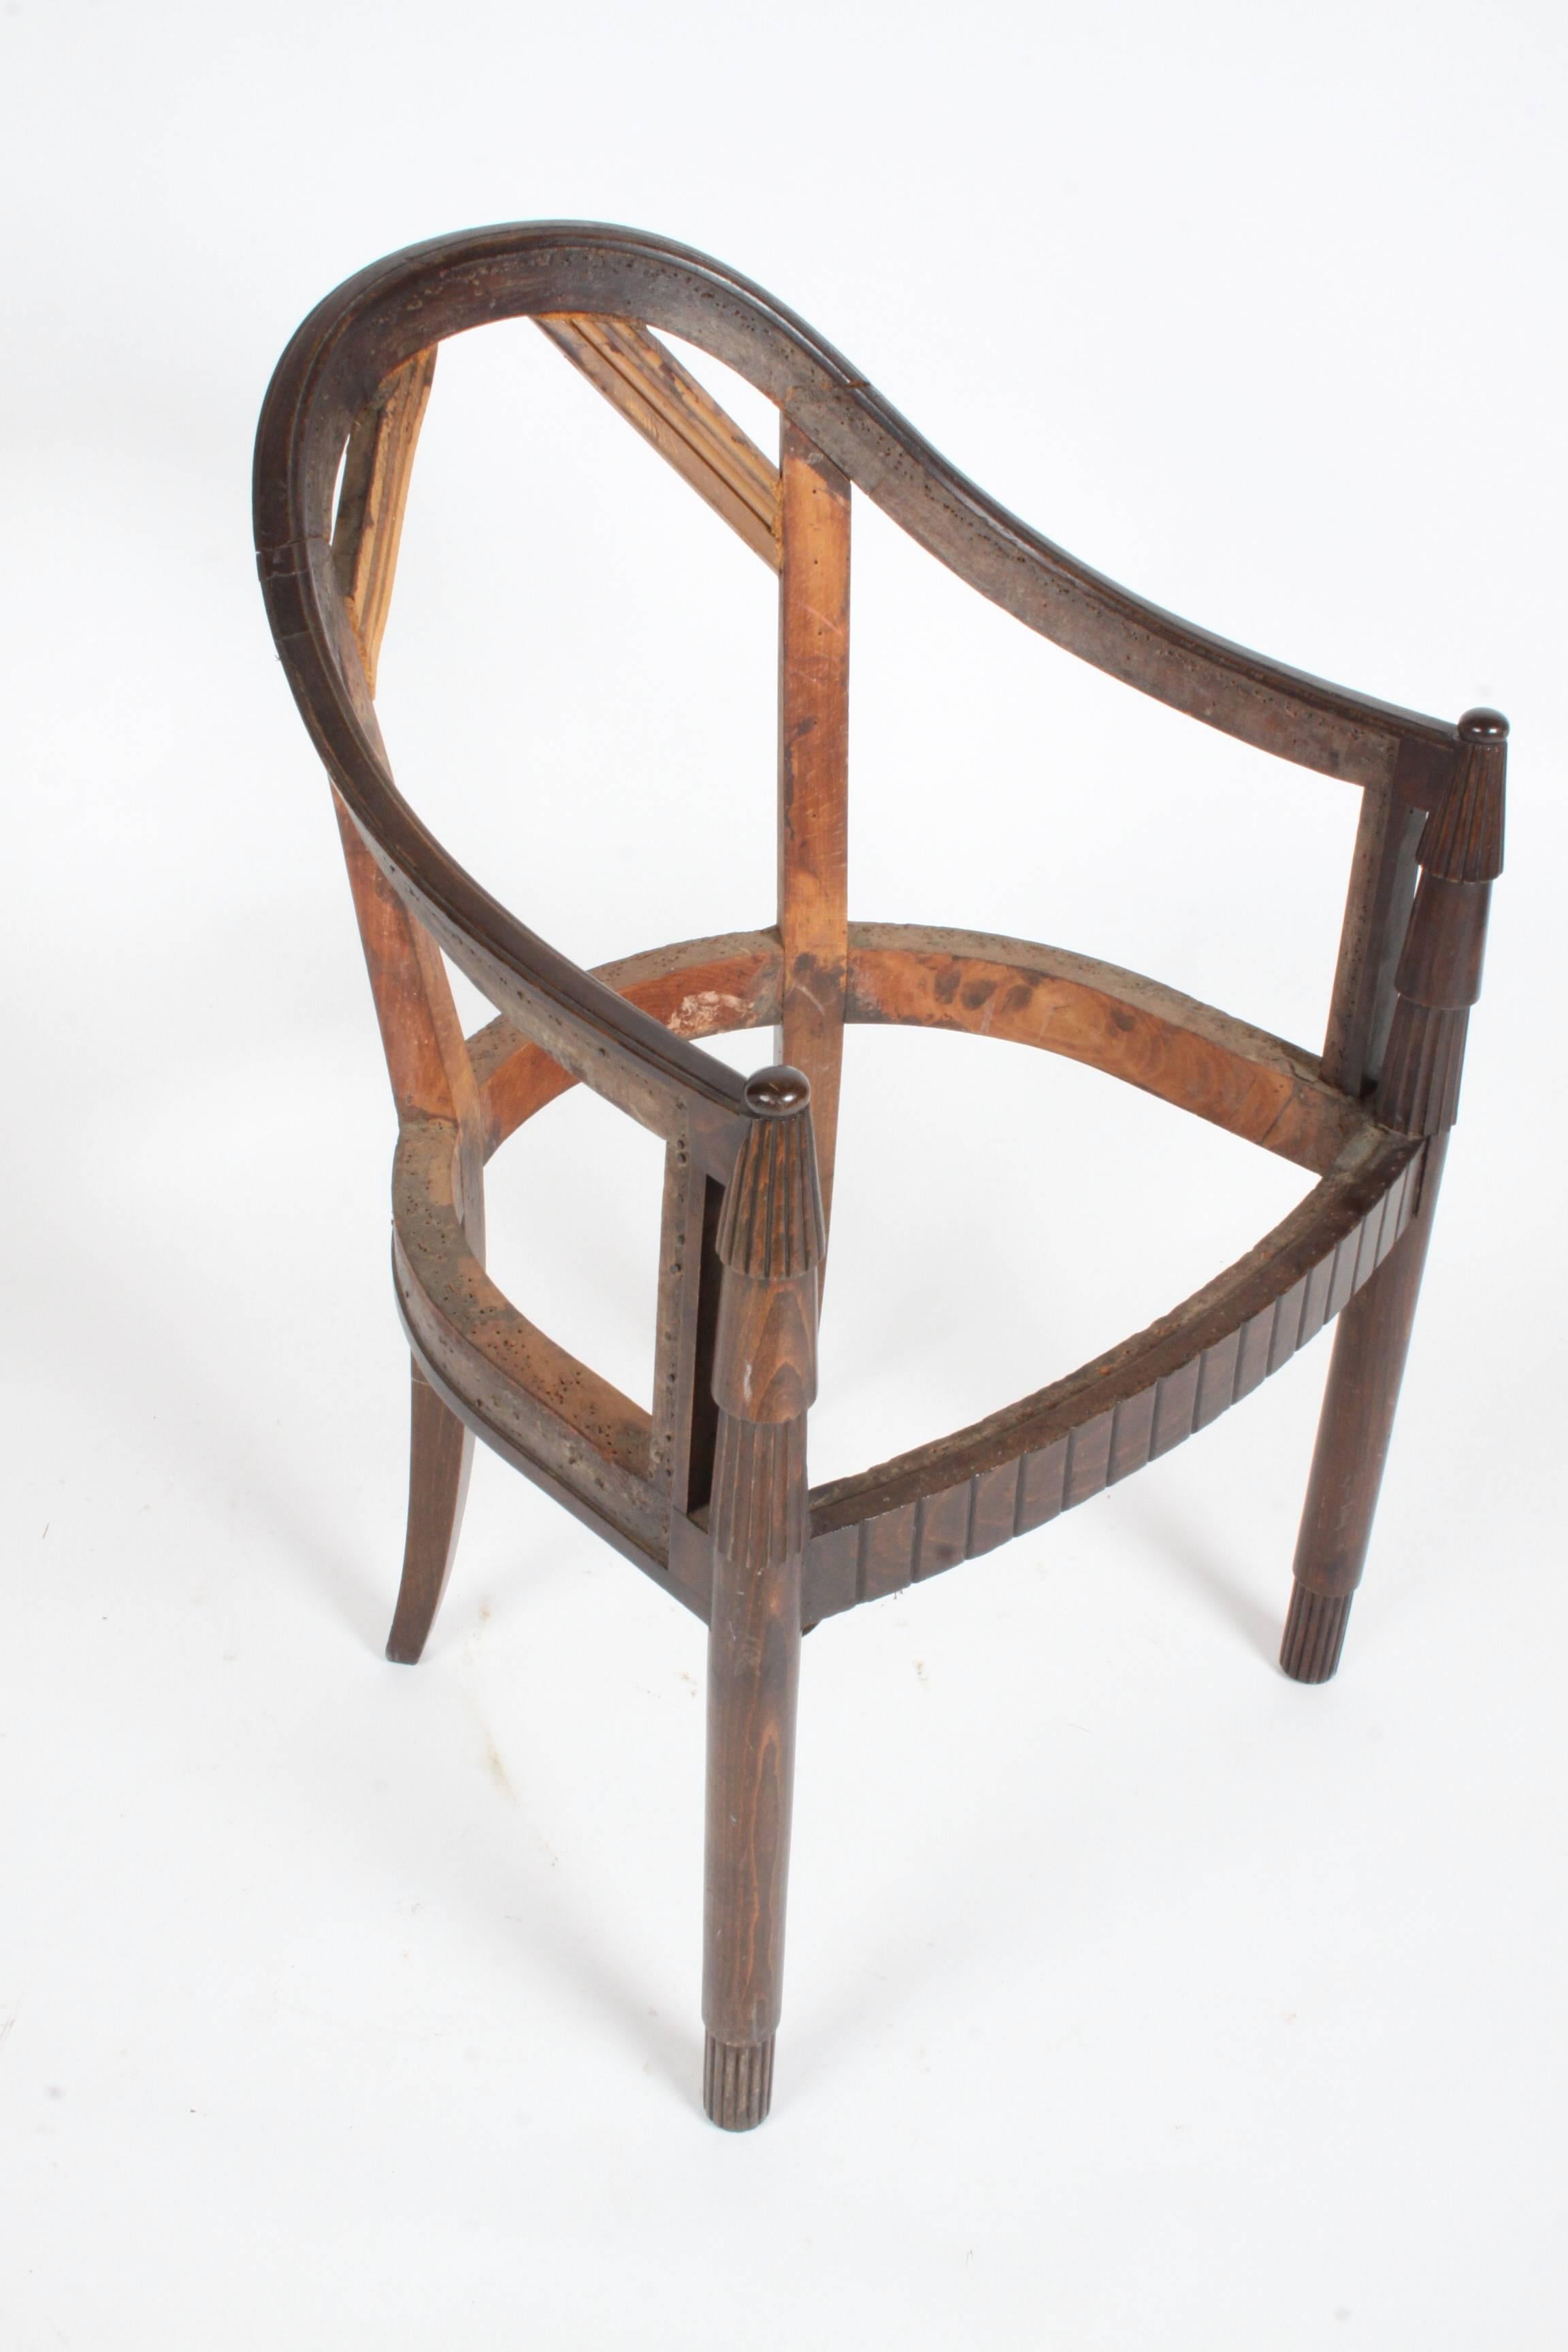 Very nice French Art Deco armchair frame, ready for your upholstery.